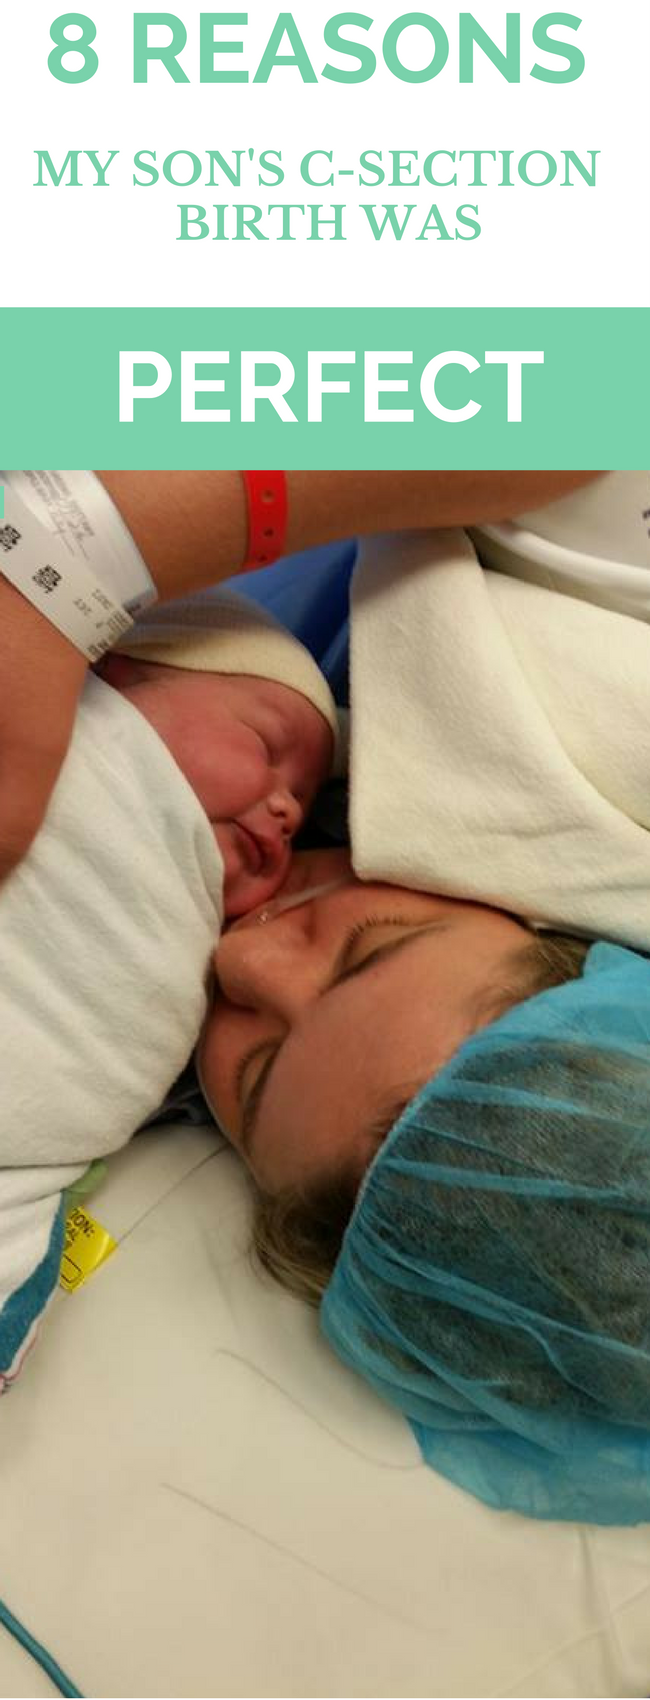 8 Reasons My Son's C-section Birth was Perfect via @clarkscondensed